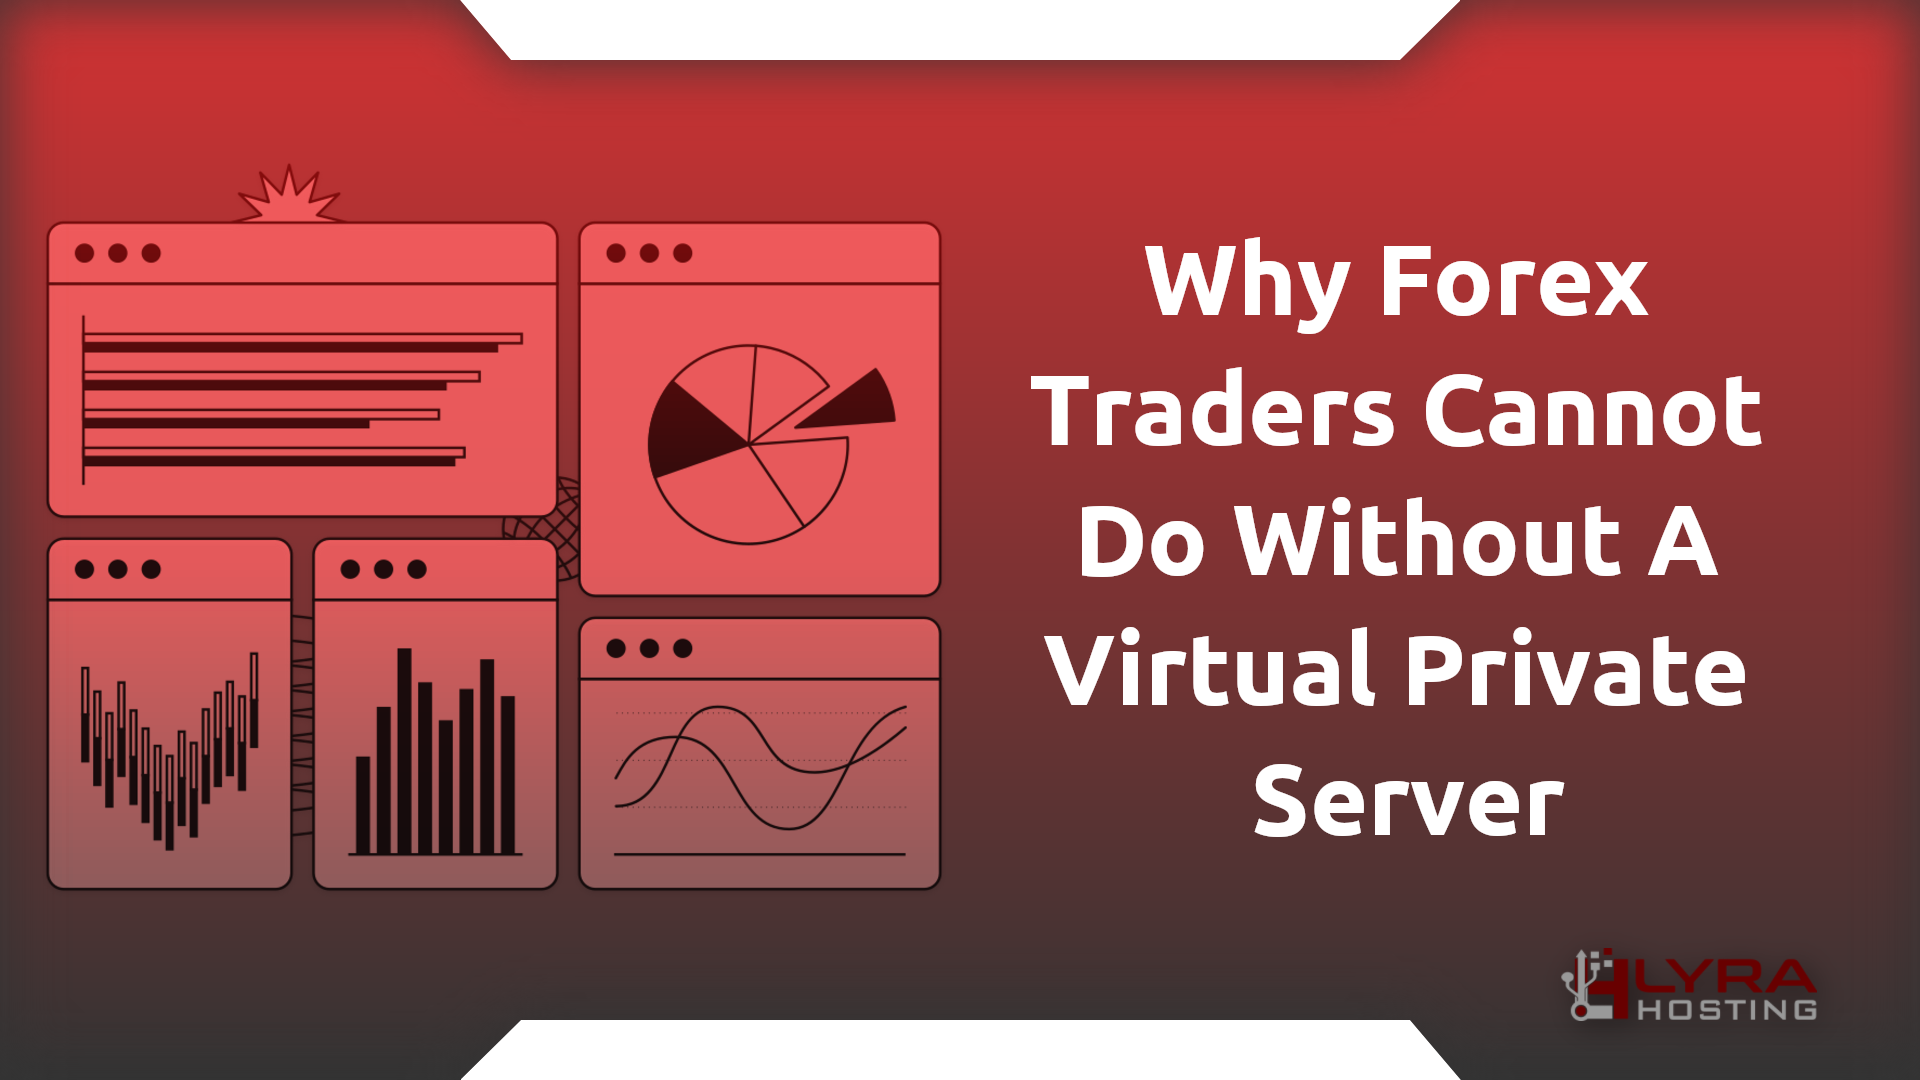 Why Forex Traders Cannot Do Without A Virtual Private Server